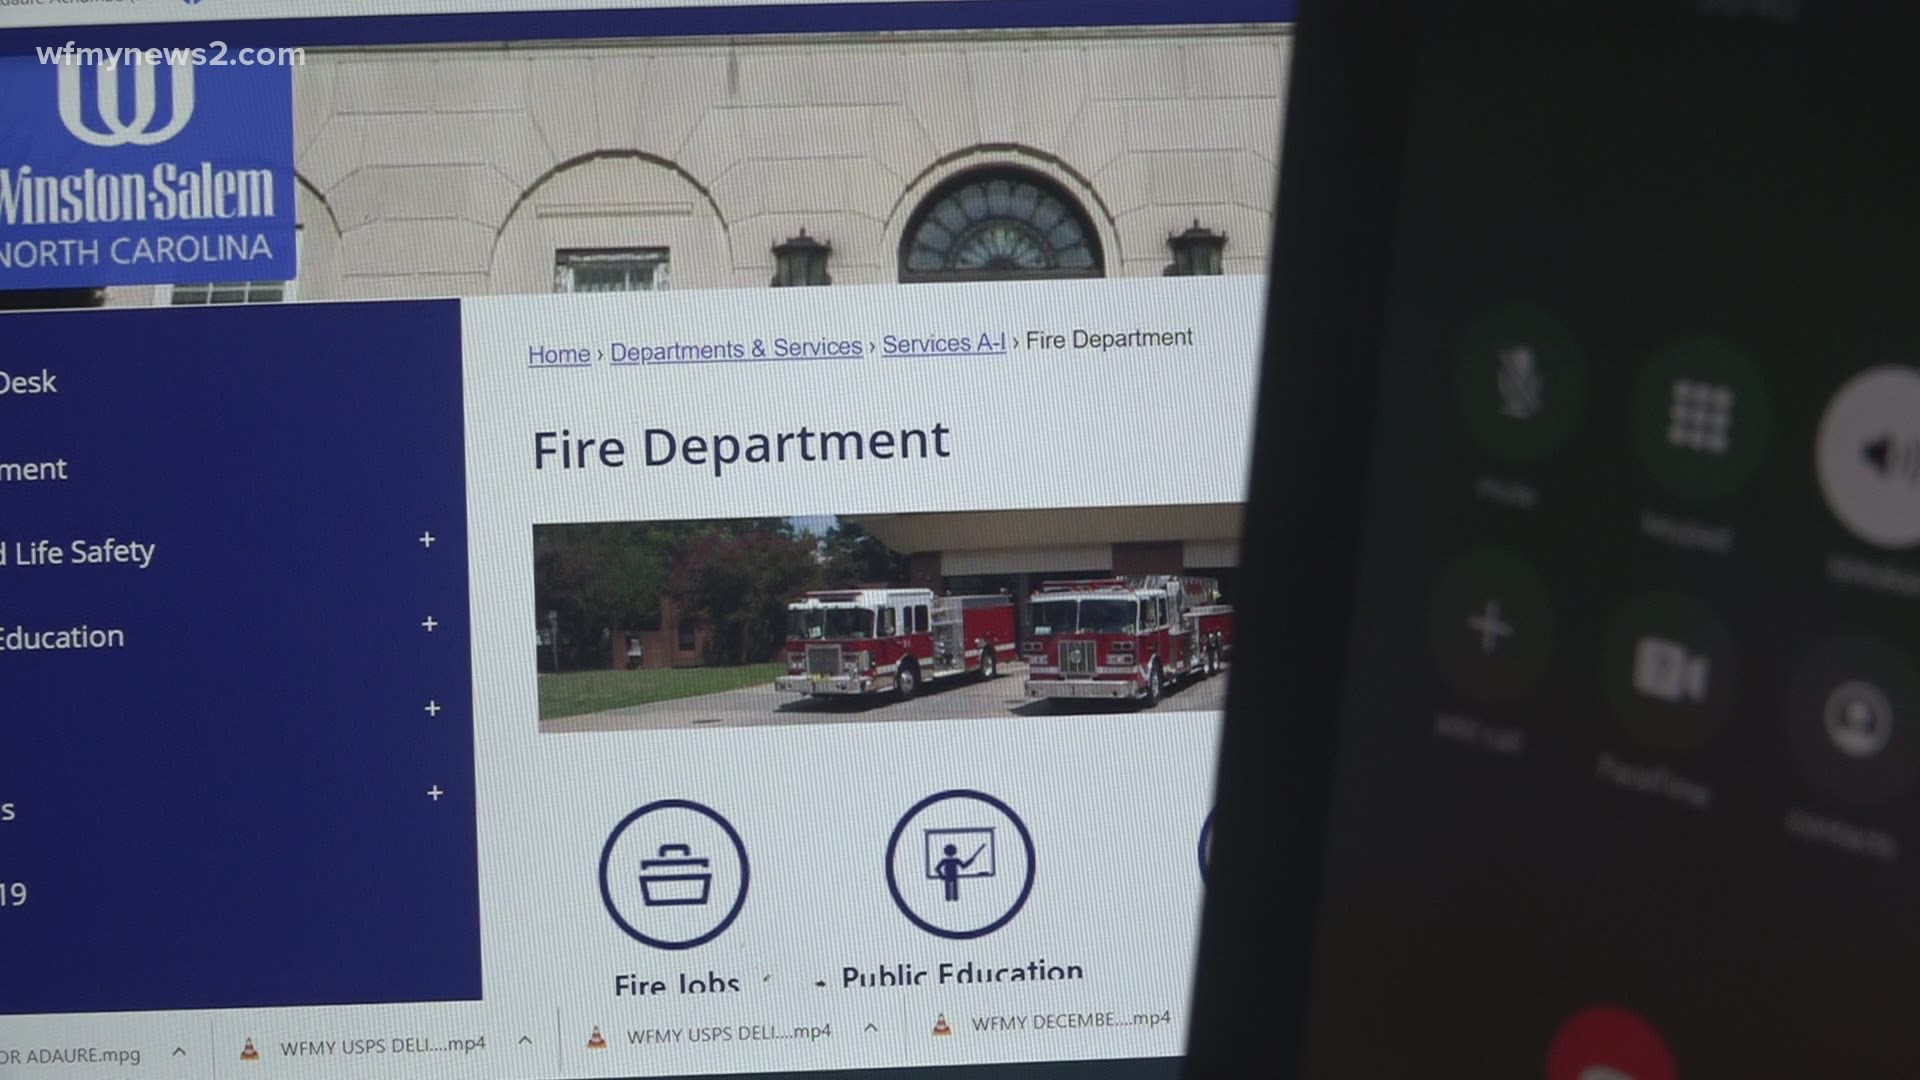 Some Winston-Salem firefighters say there's racism within the fire department. A grievance was filed calling for those responsible and the fire chief to be fired.